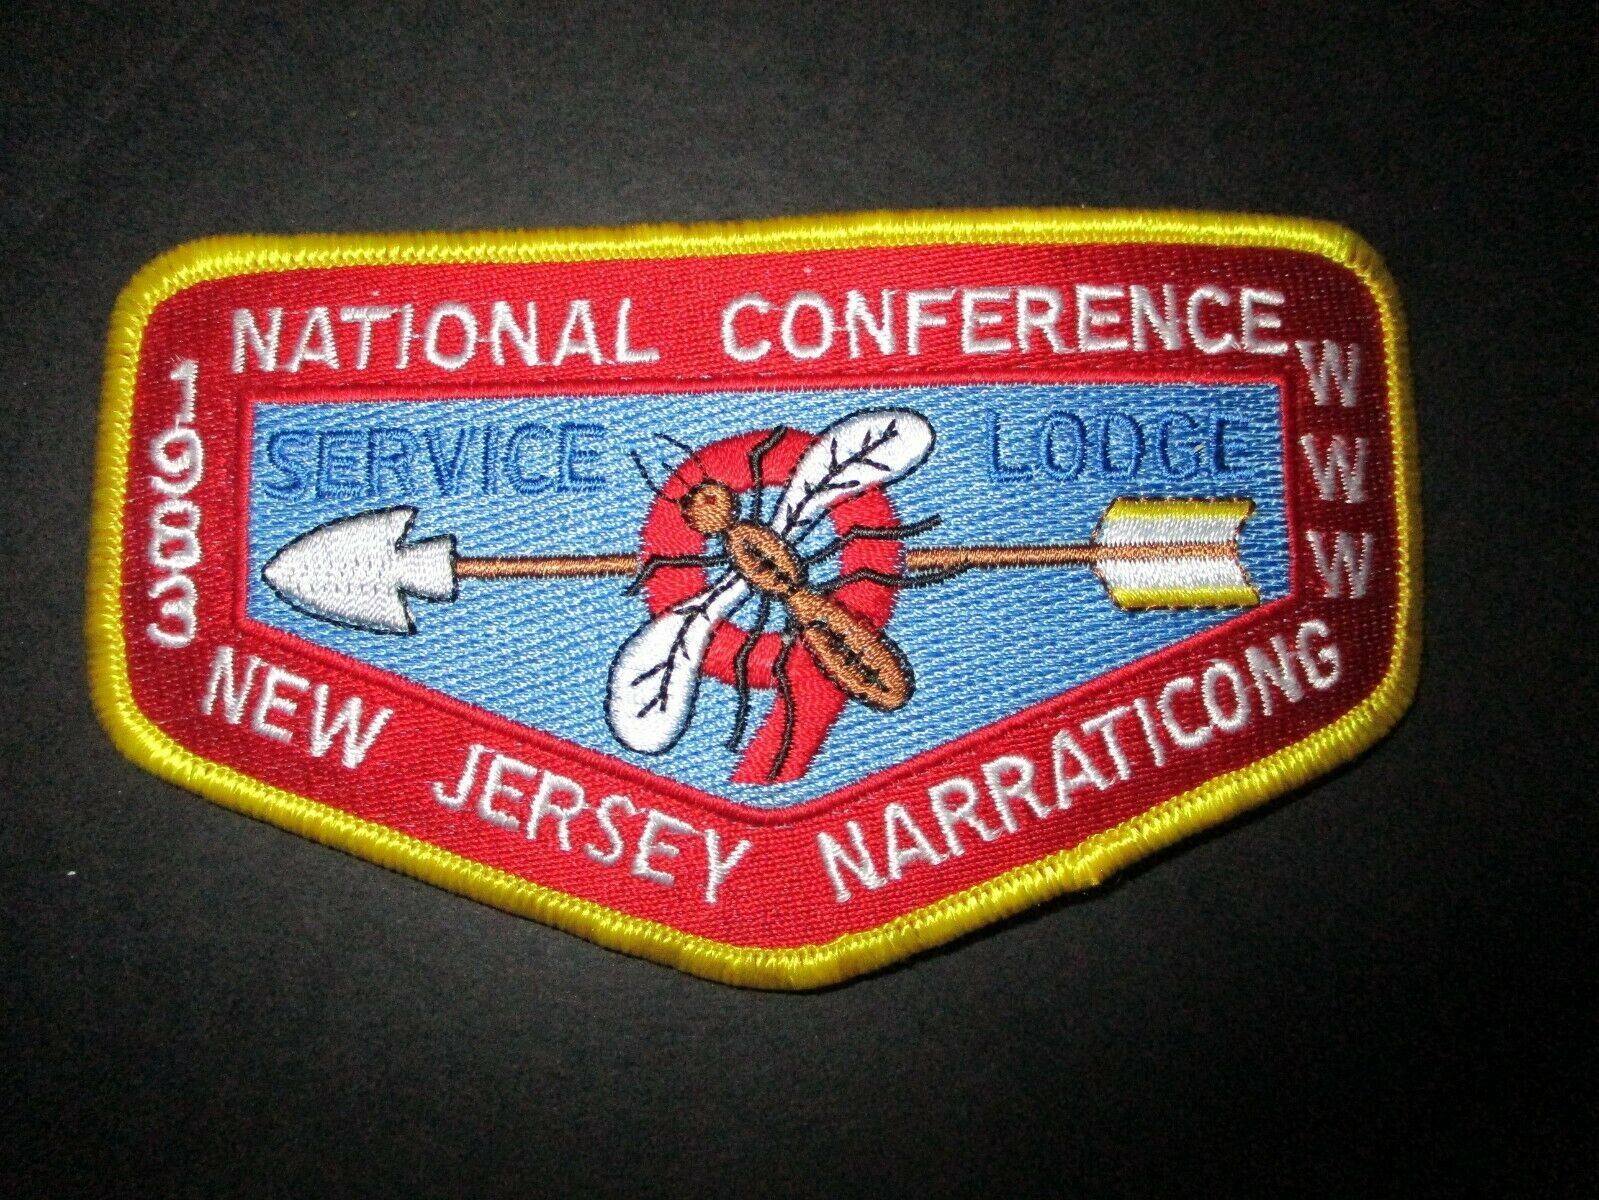 OA Lodge 1983 Service-National Conference yellow border flap